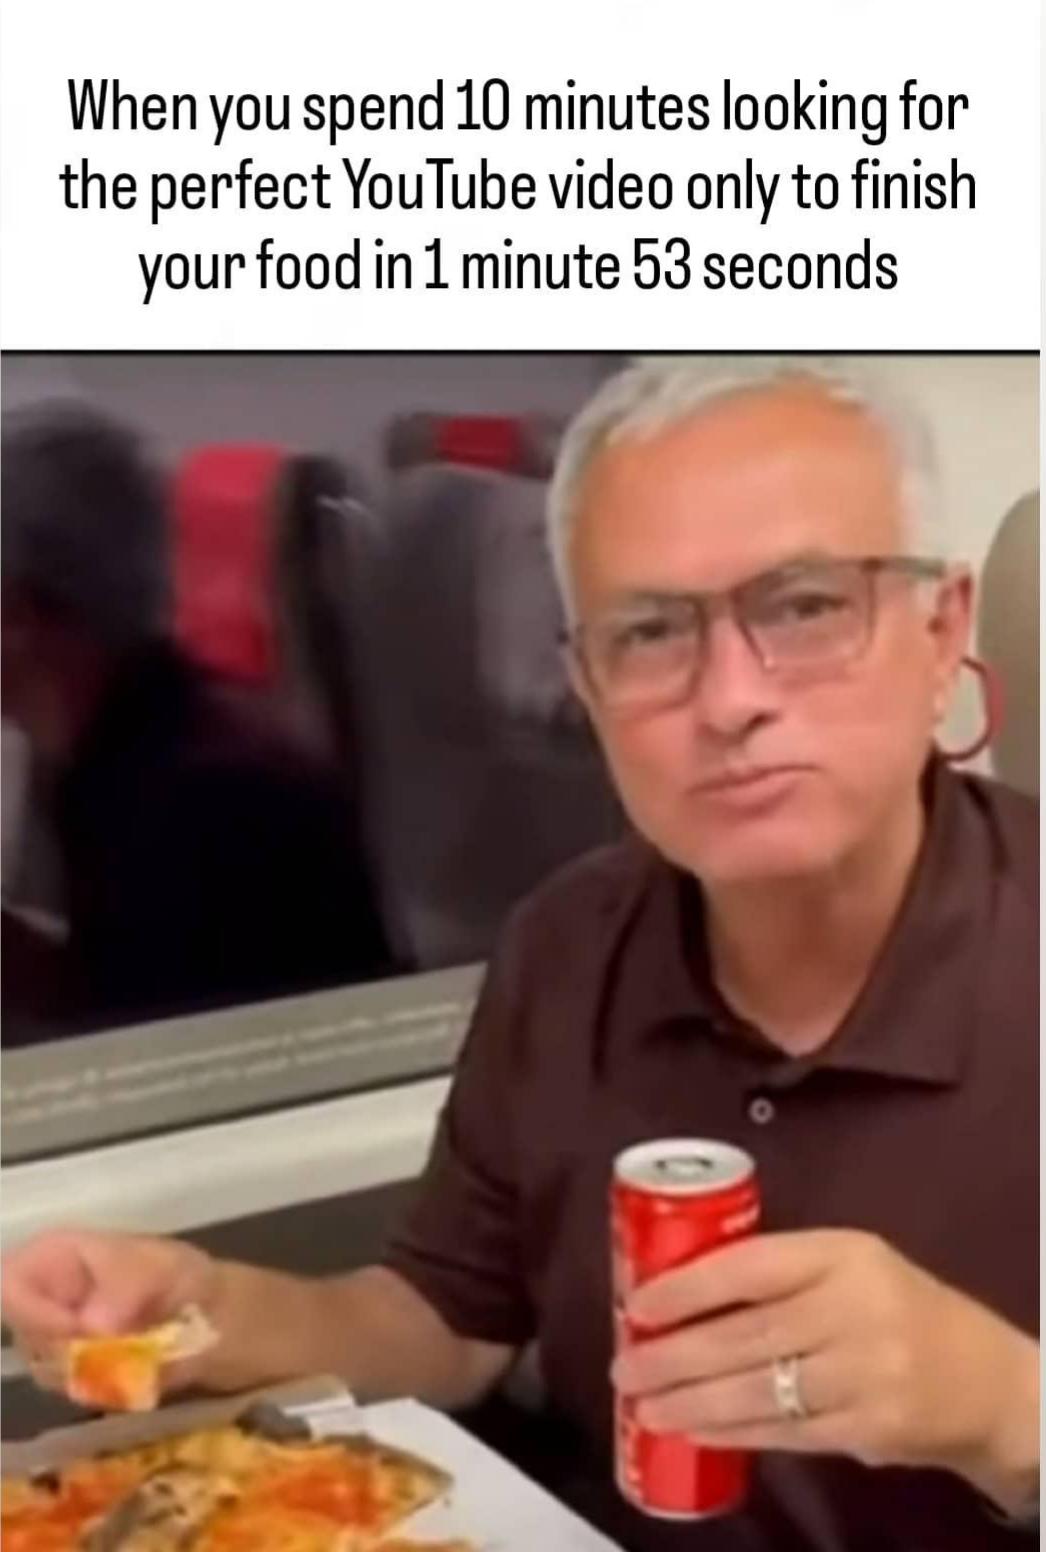 dank memes and funny pics - When you spend 10 minutes looking for the perfect YouTube video only to finish your food in 1 minute 53 seconds